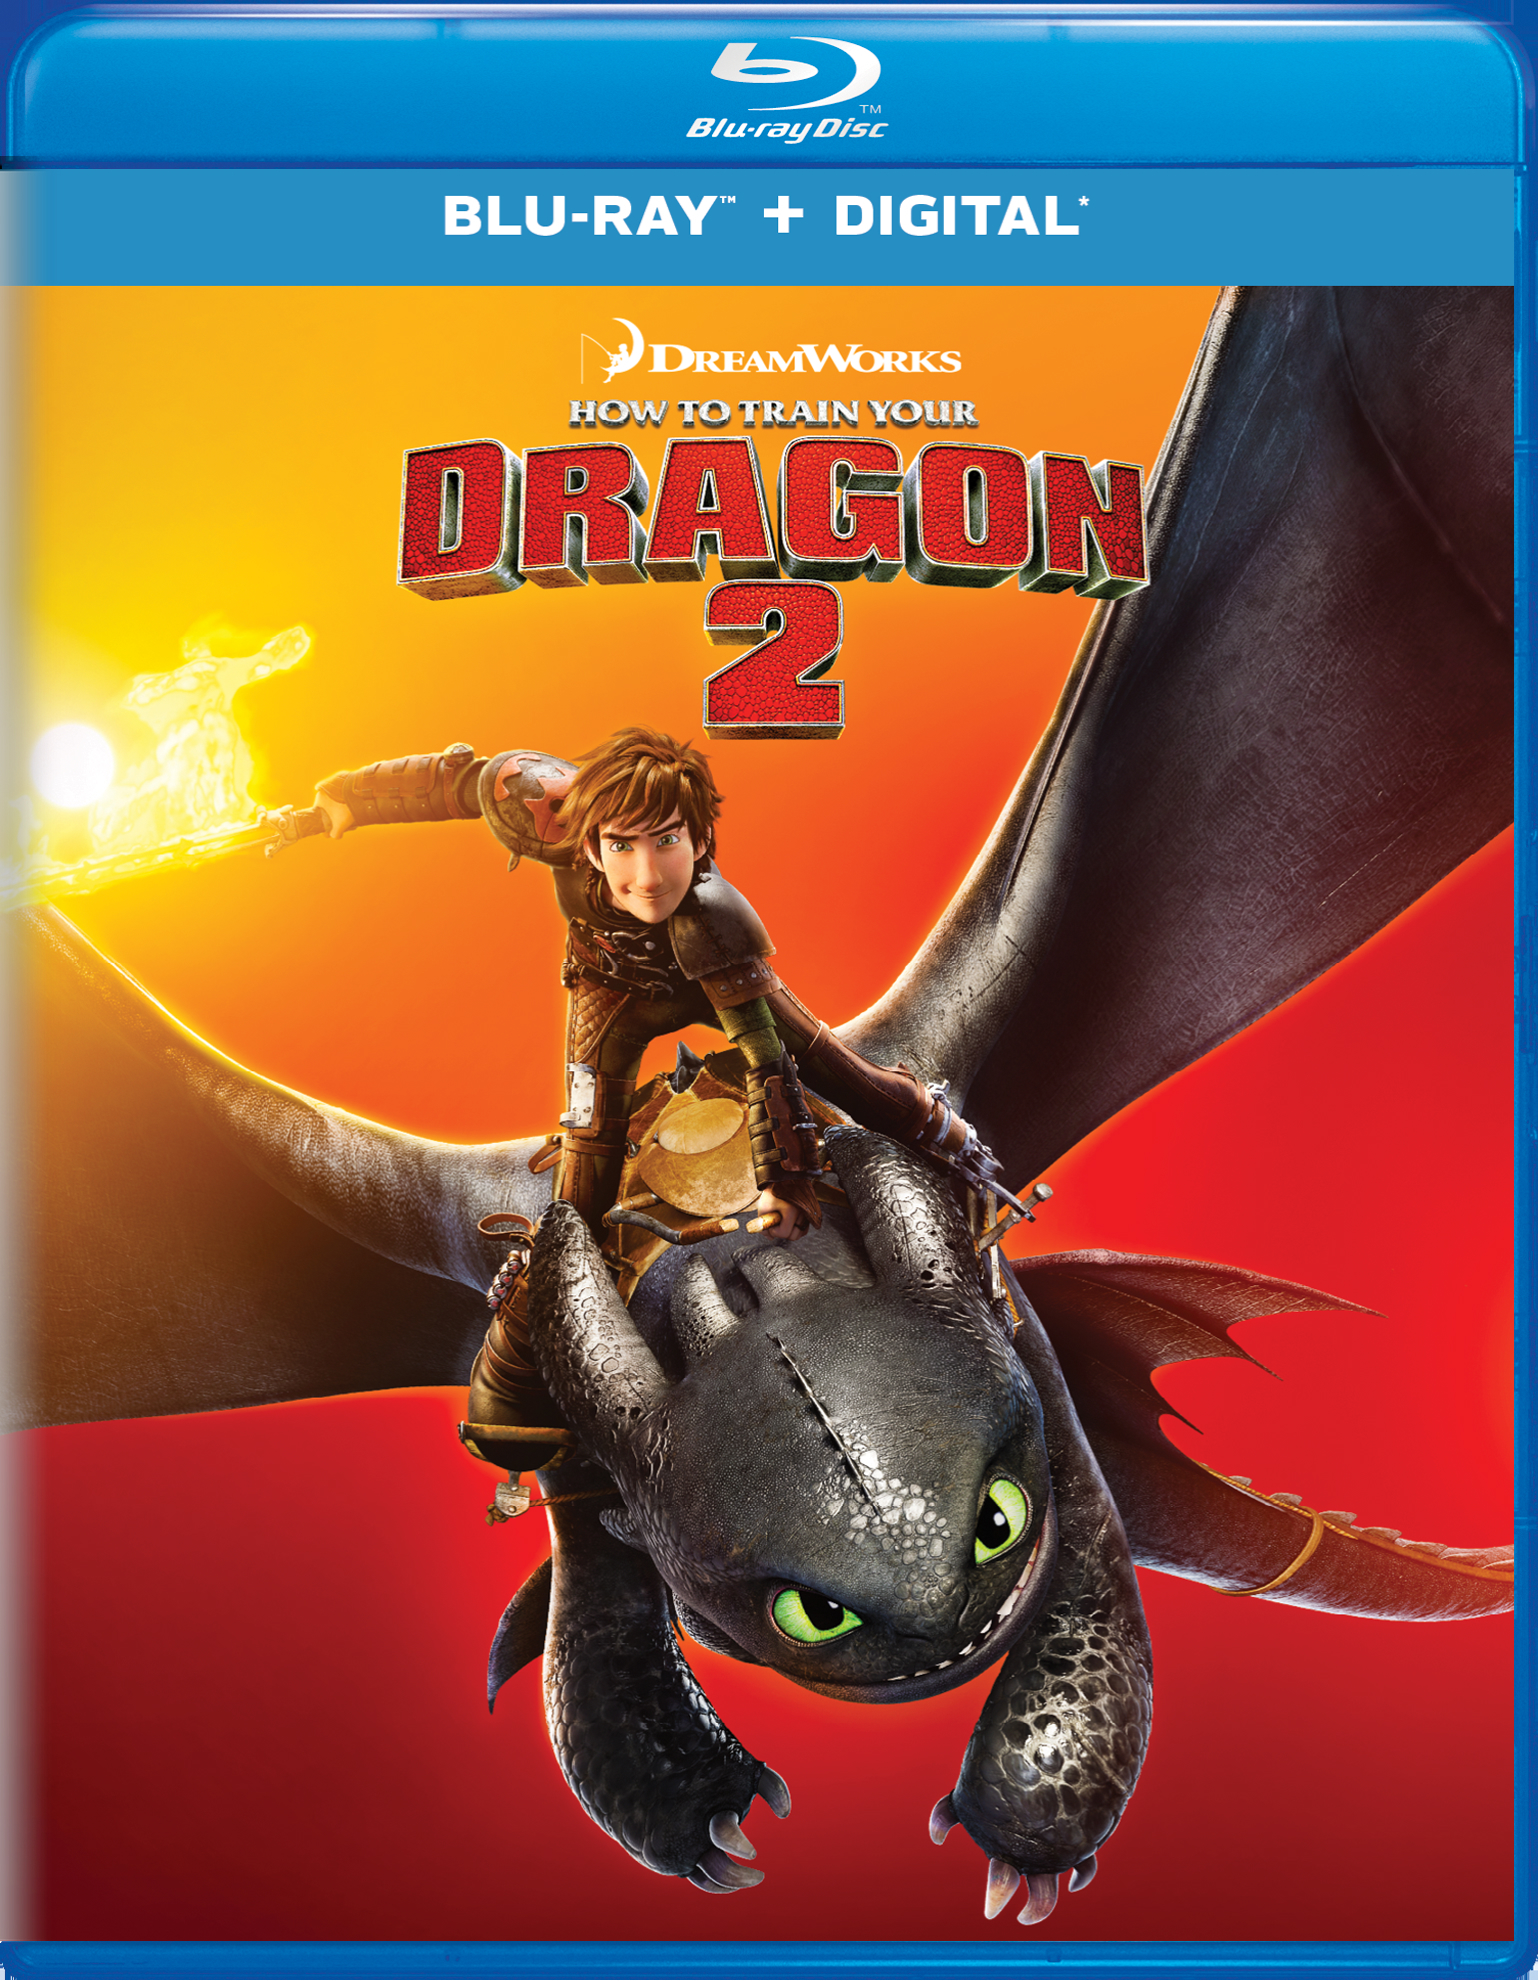 How To Train Your Dragon 2 (Blu-ray New Box Art) - Blu-ray [ 2014 ]  - Animation Movies On Blu-ray - Movies On GRUV